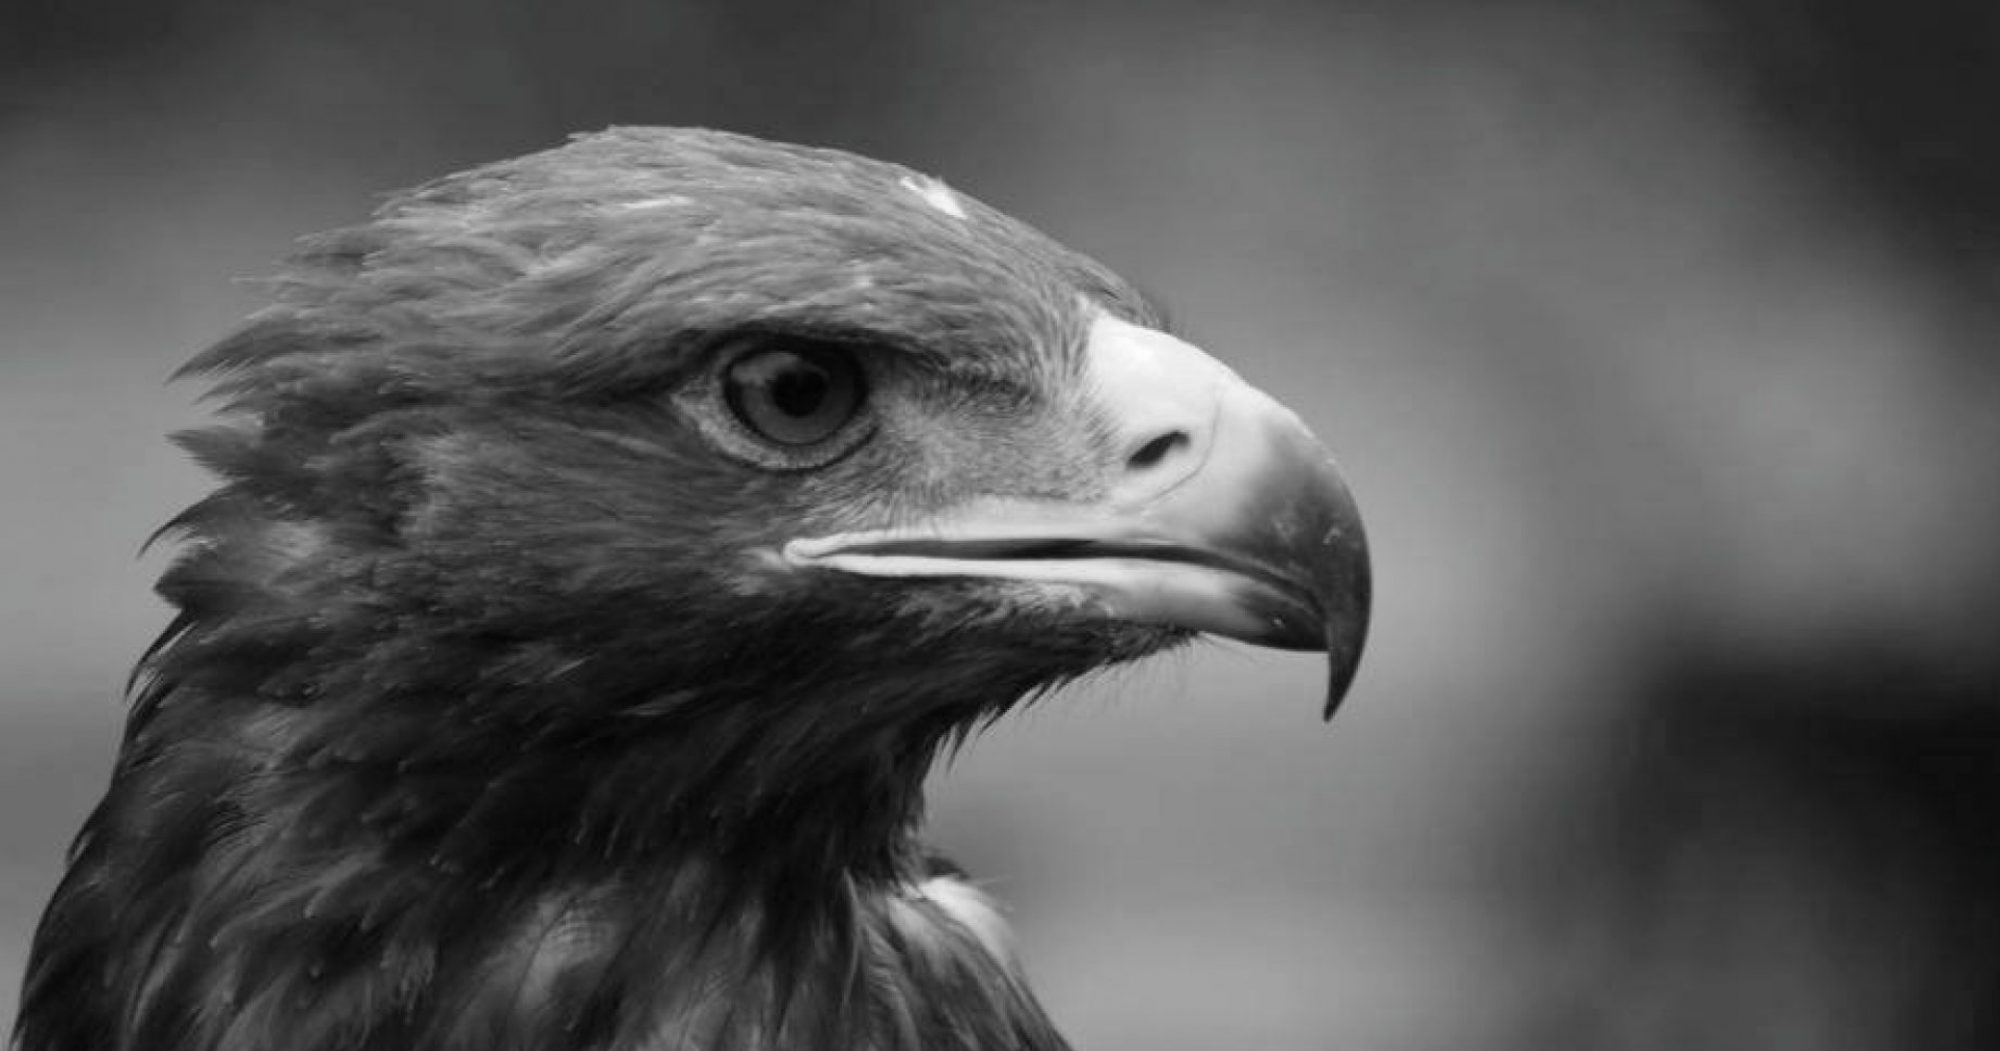 1st National Conference of bird of prey professionals - Sponsored by The Falconry App